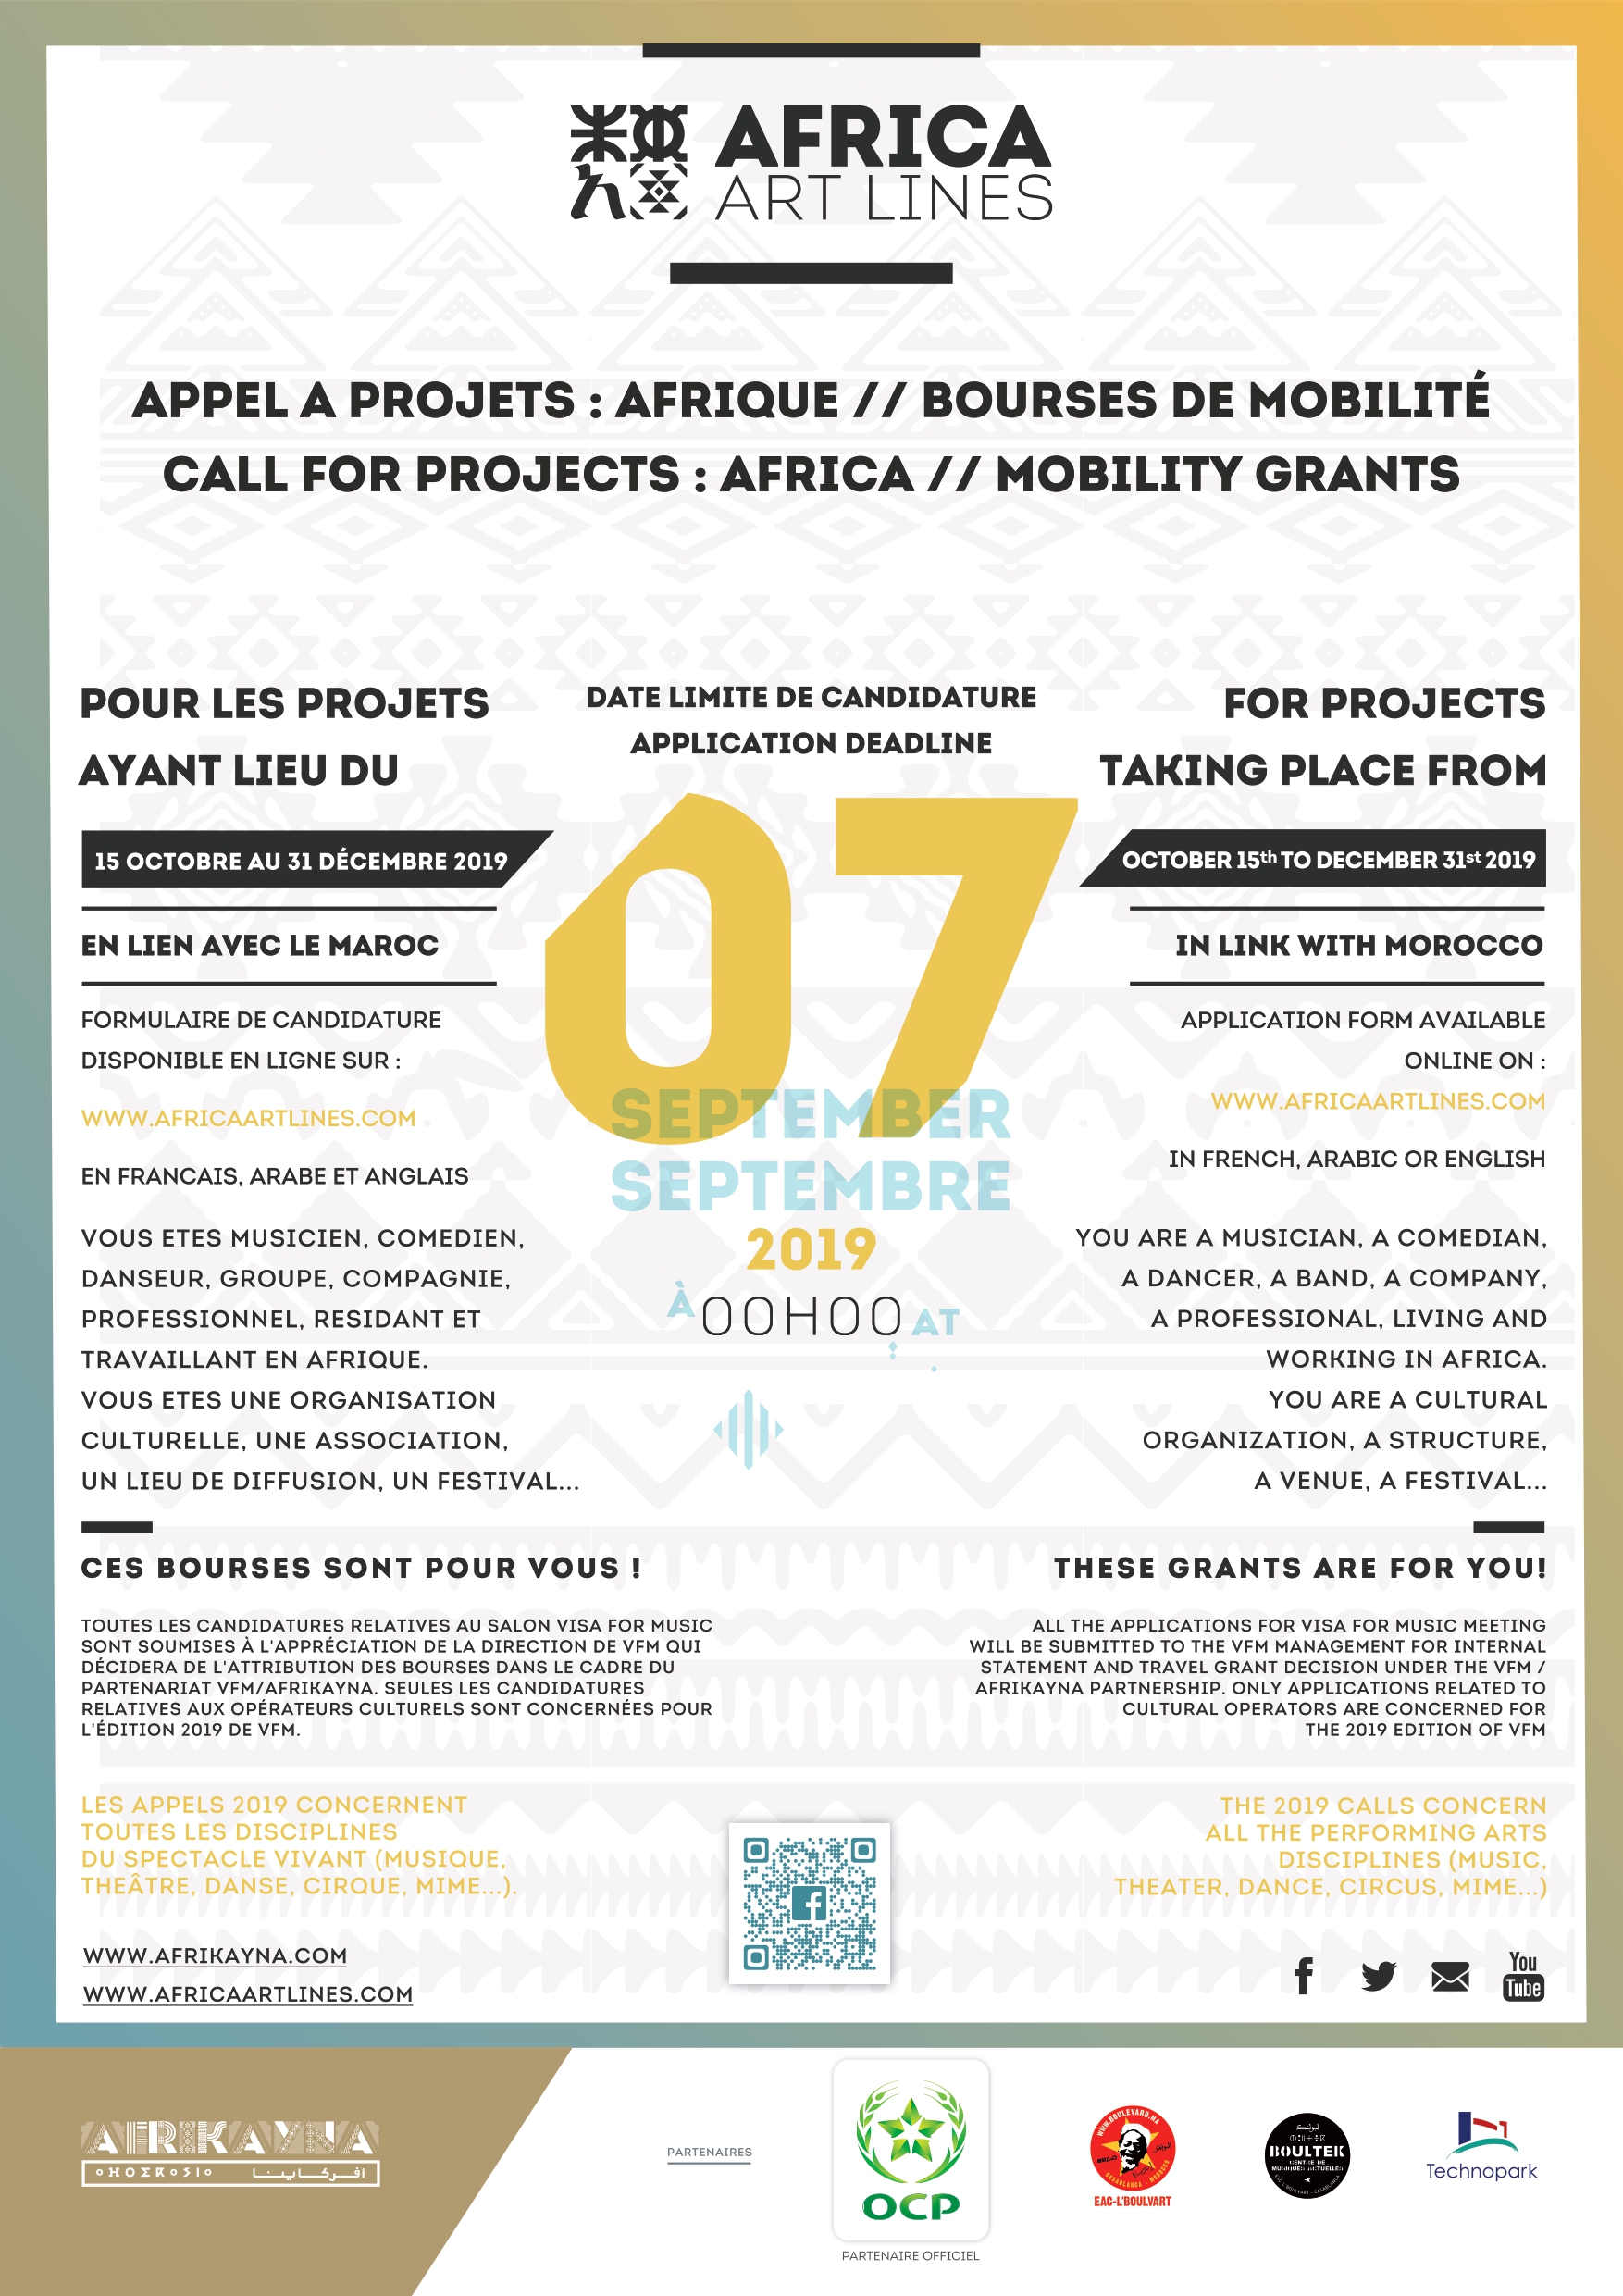 APPEL A PROJETS AFRICA ART LINES N°2 – 2019